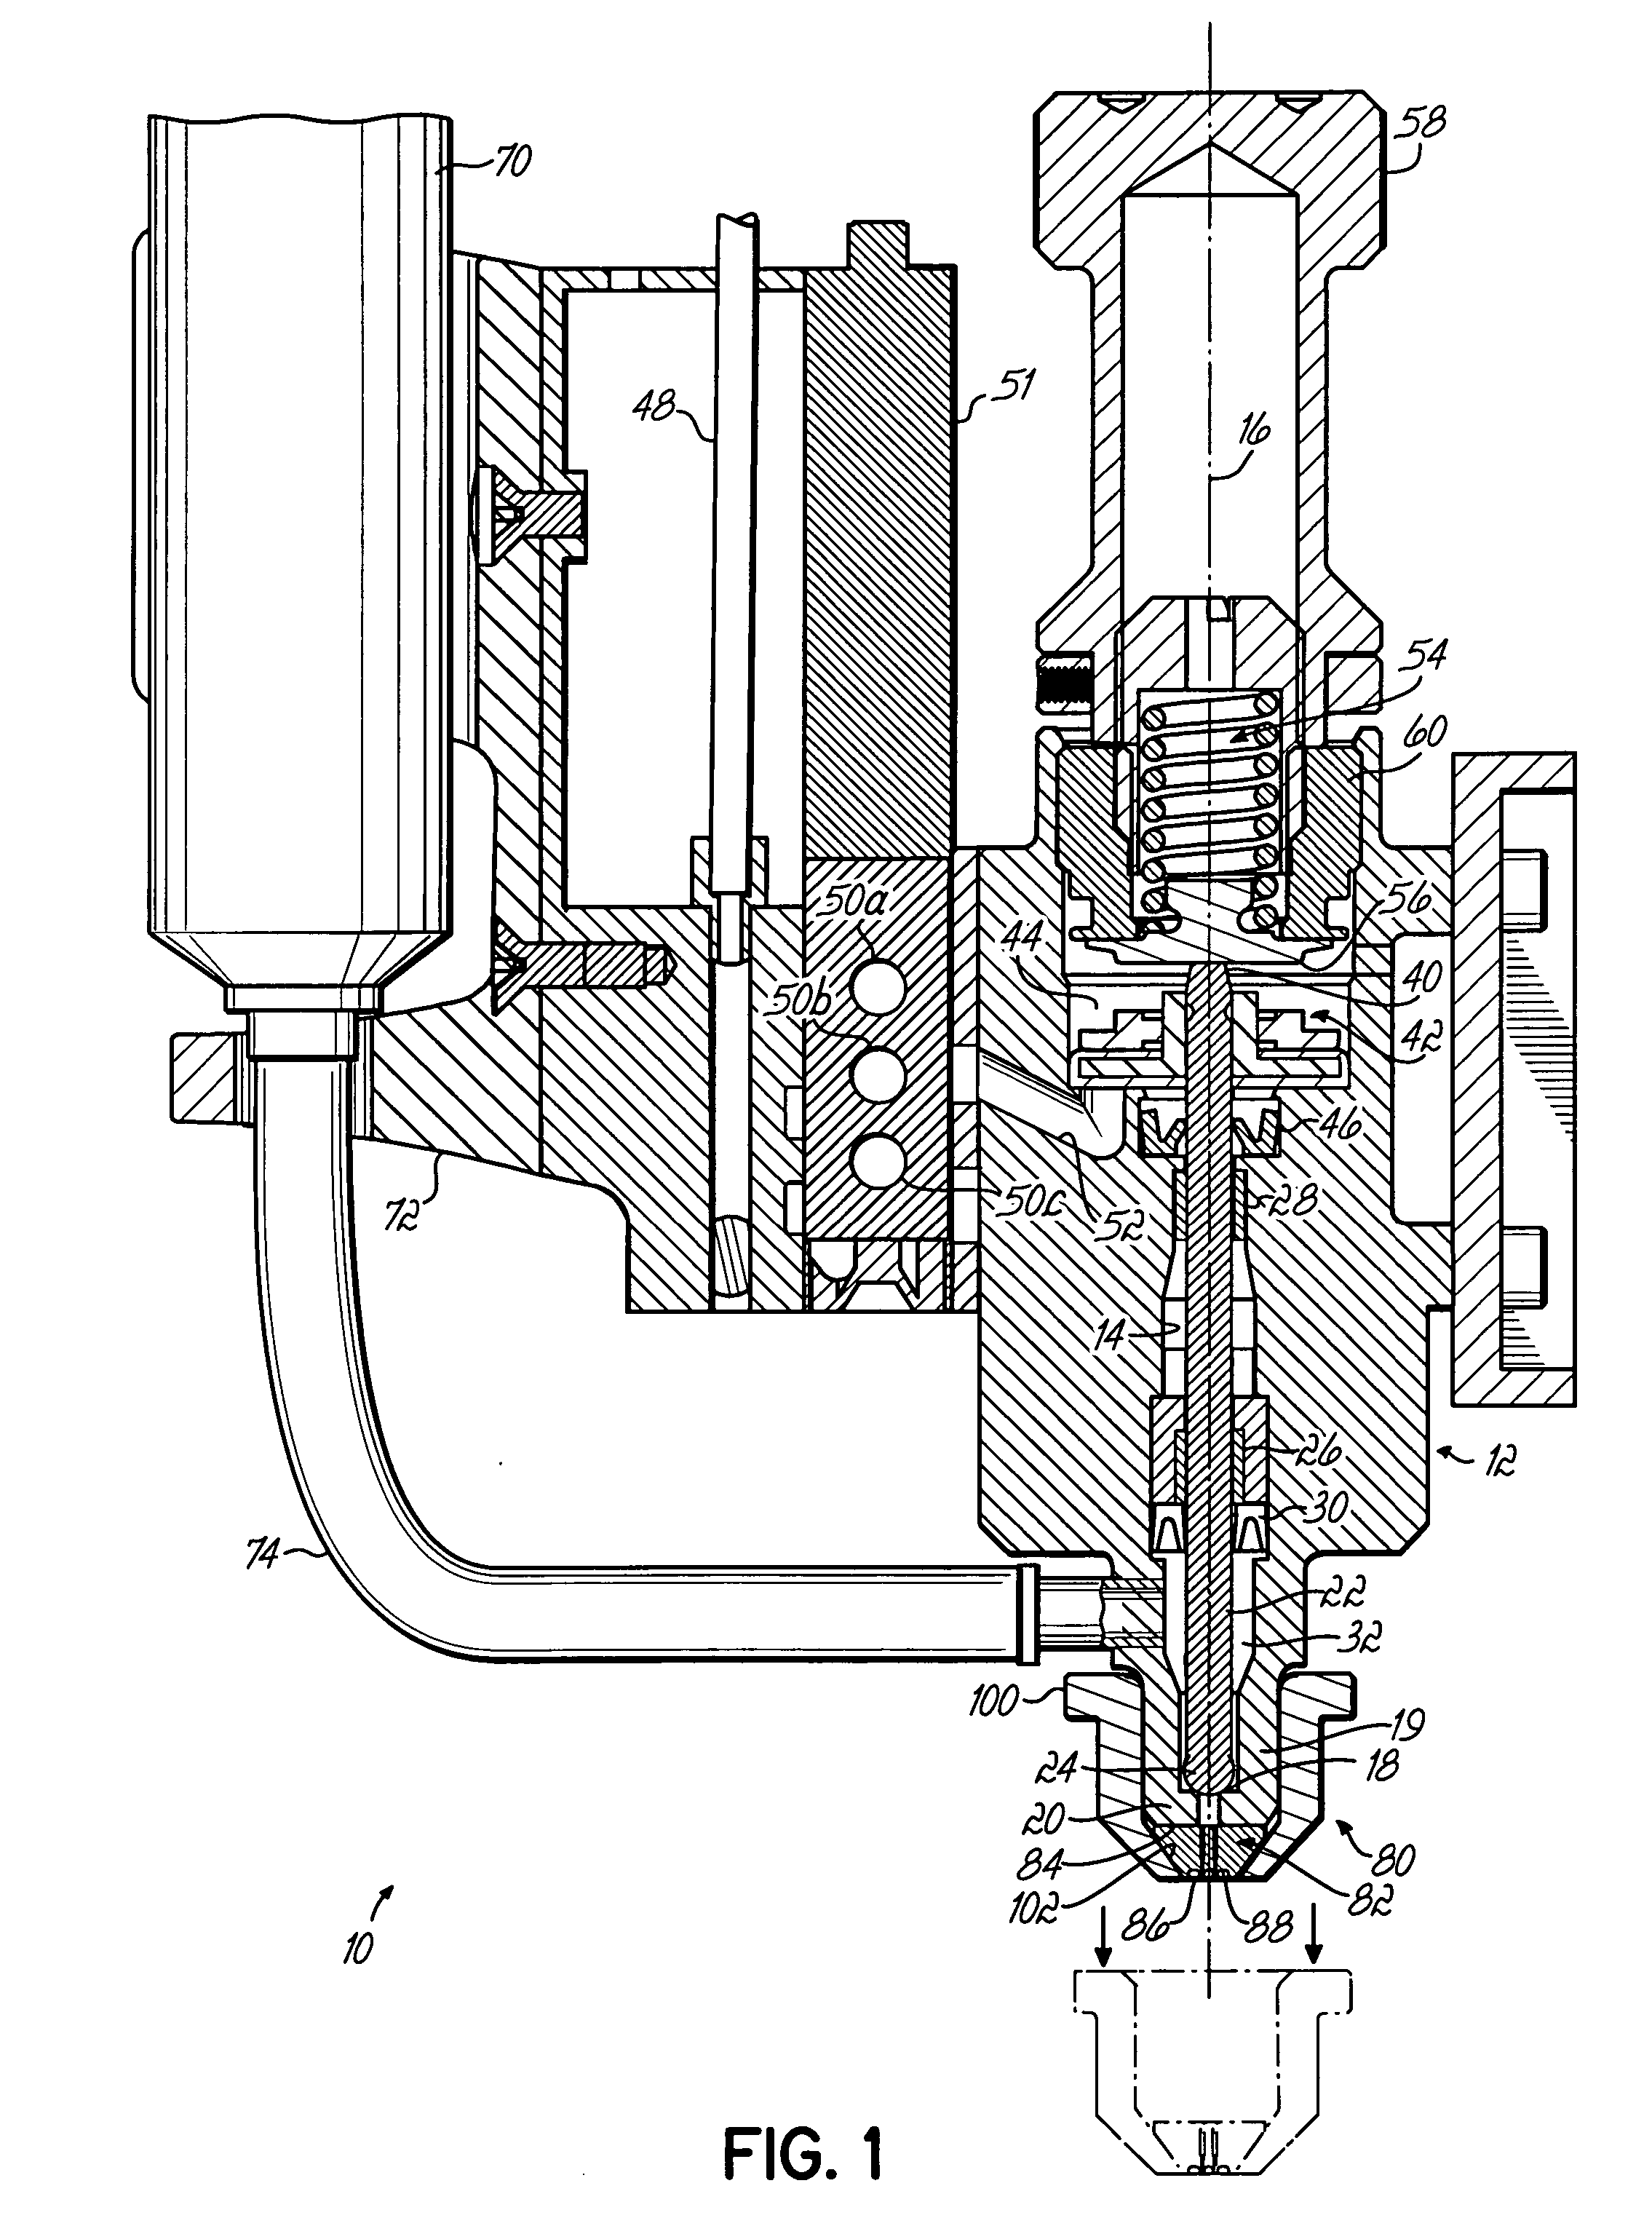 Jetting dispenser with multiple jetting nozzle outlets